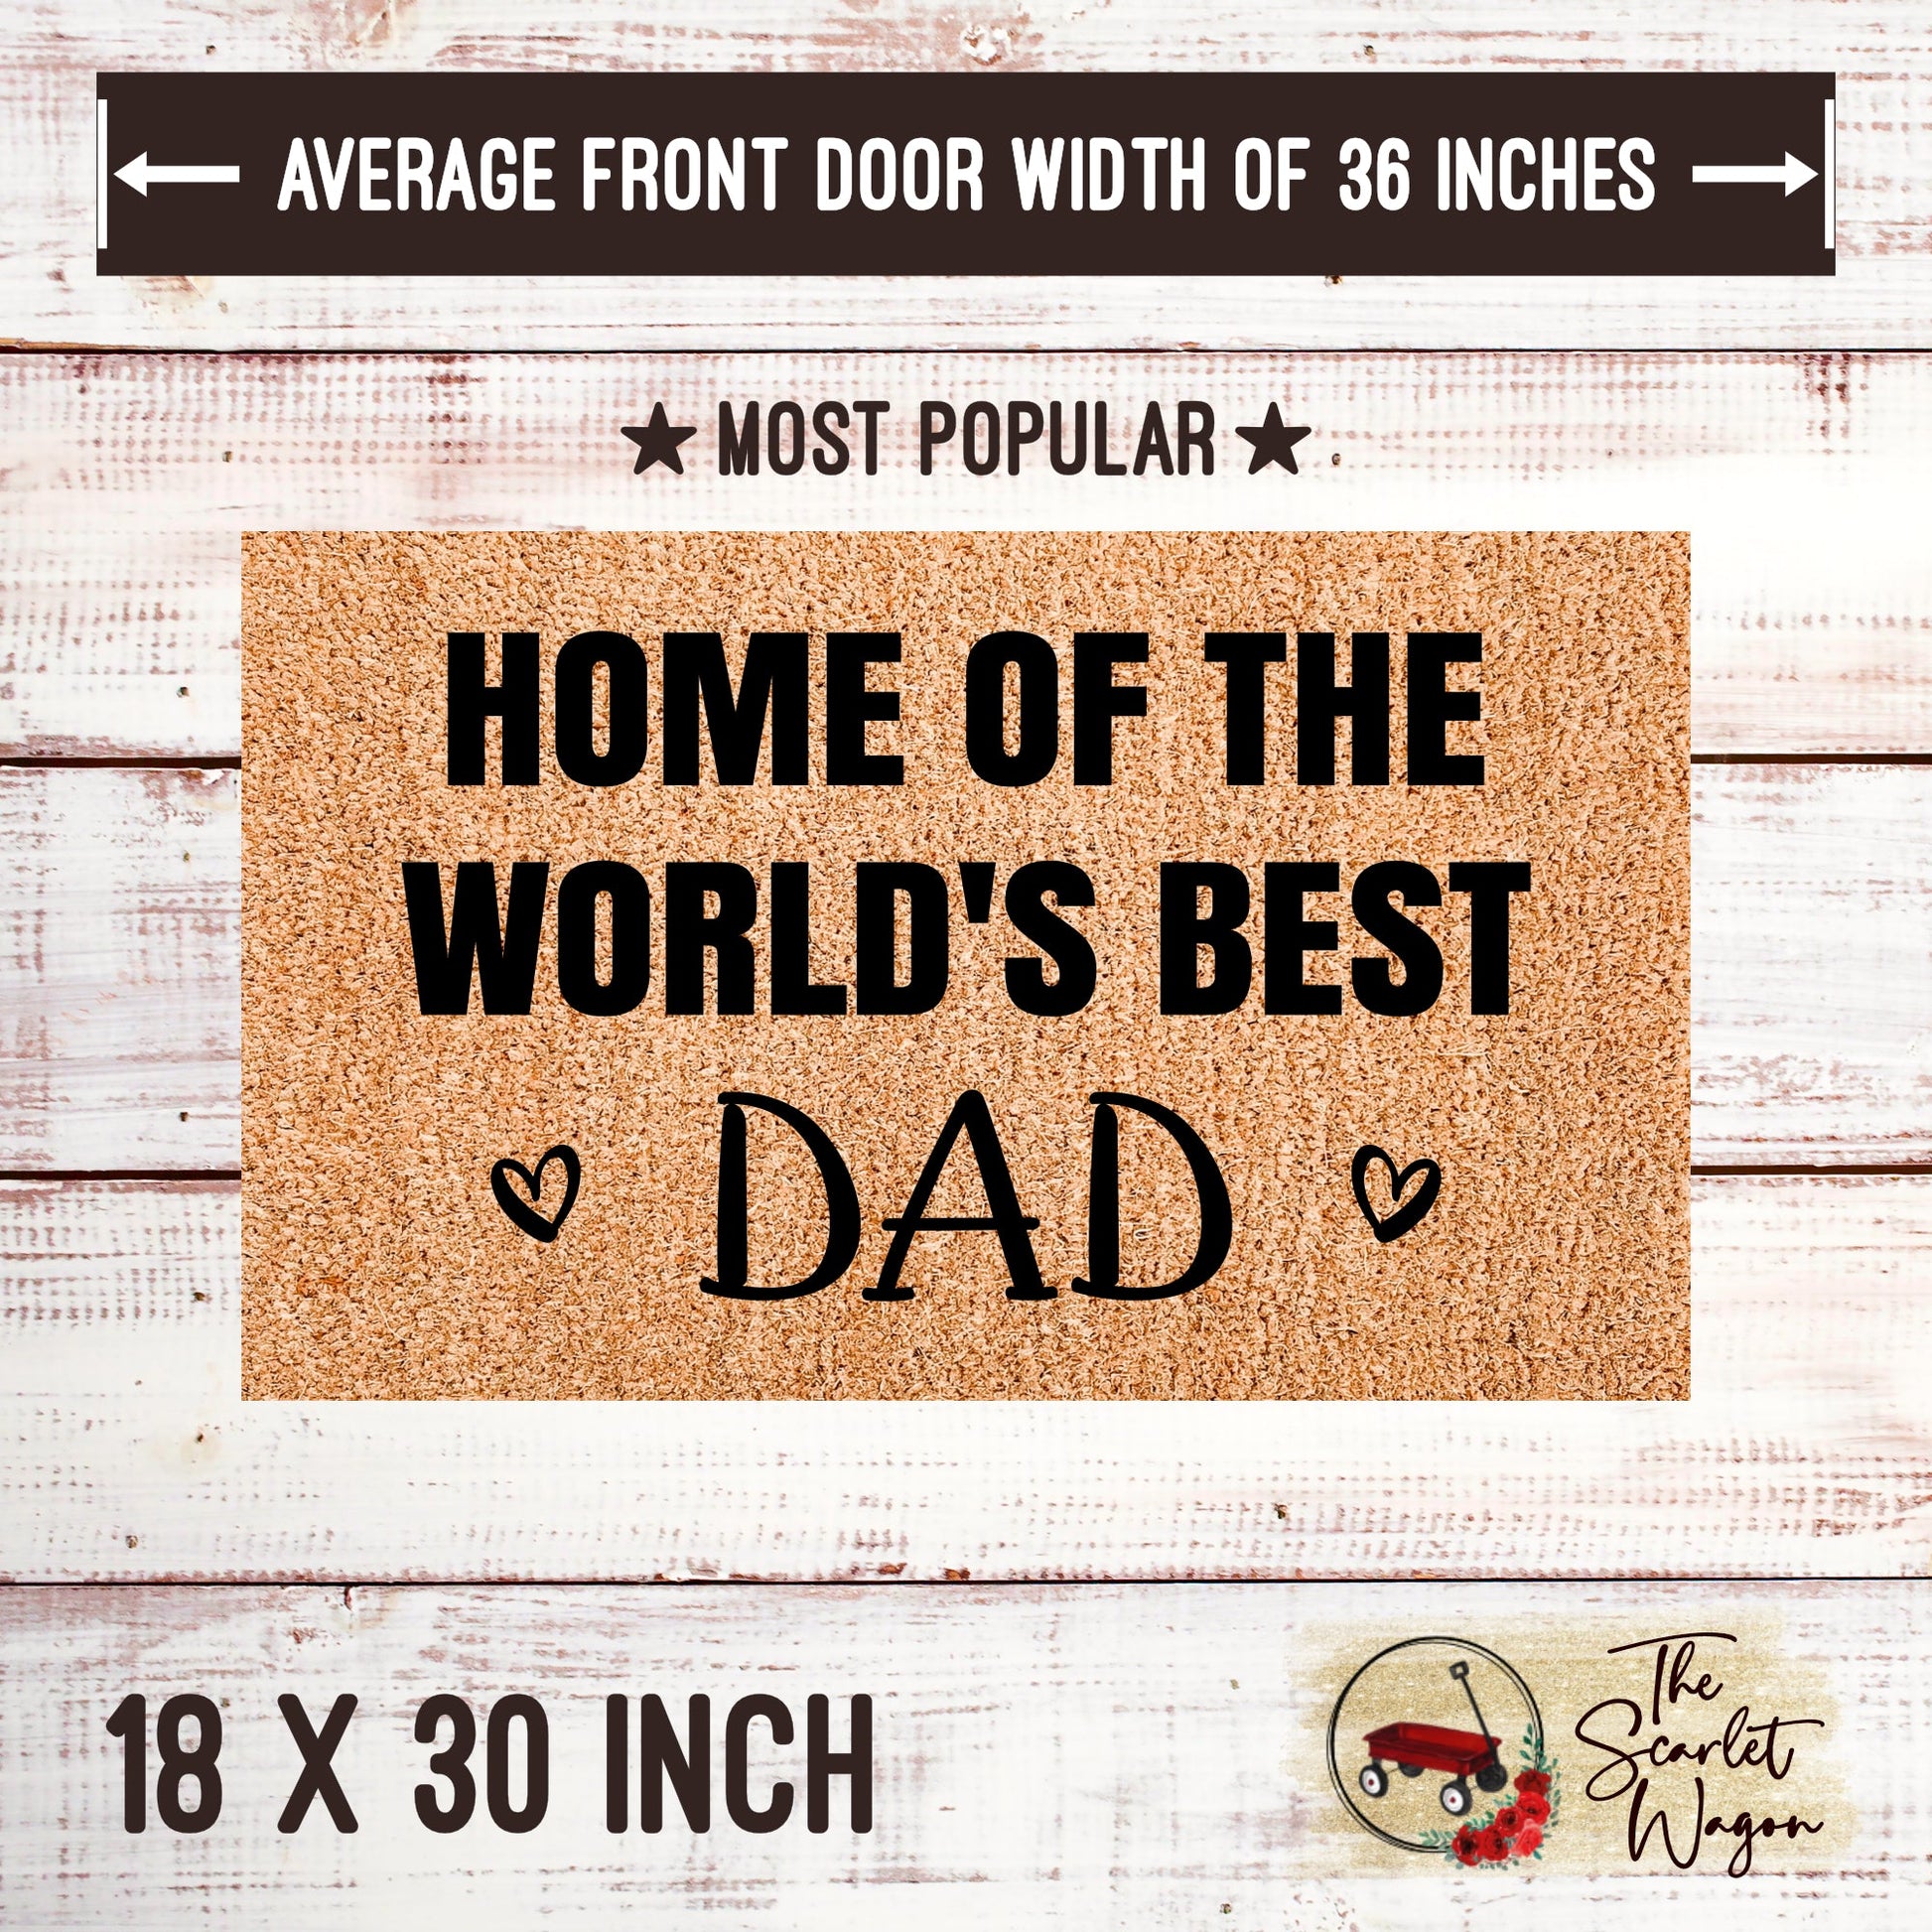 Home of the World's Best Dad Door Mats teelaunch 18x30 Inches (Free Shipping) 